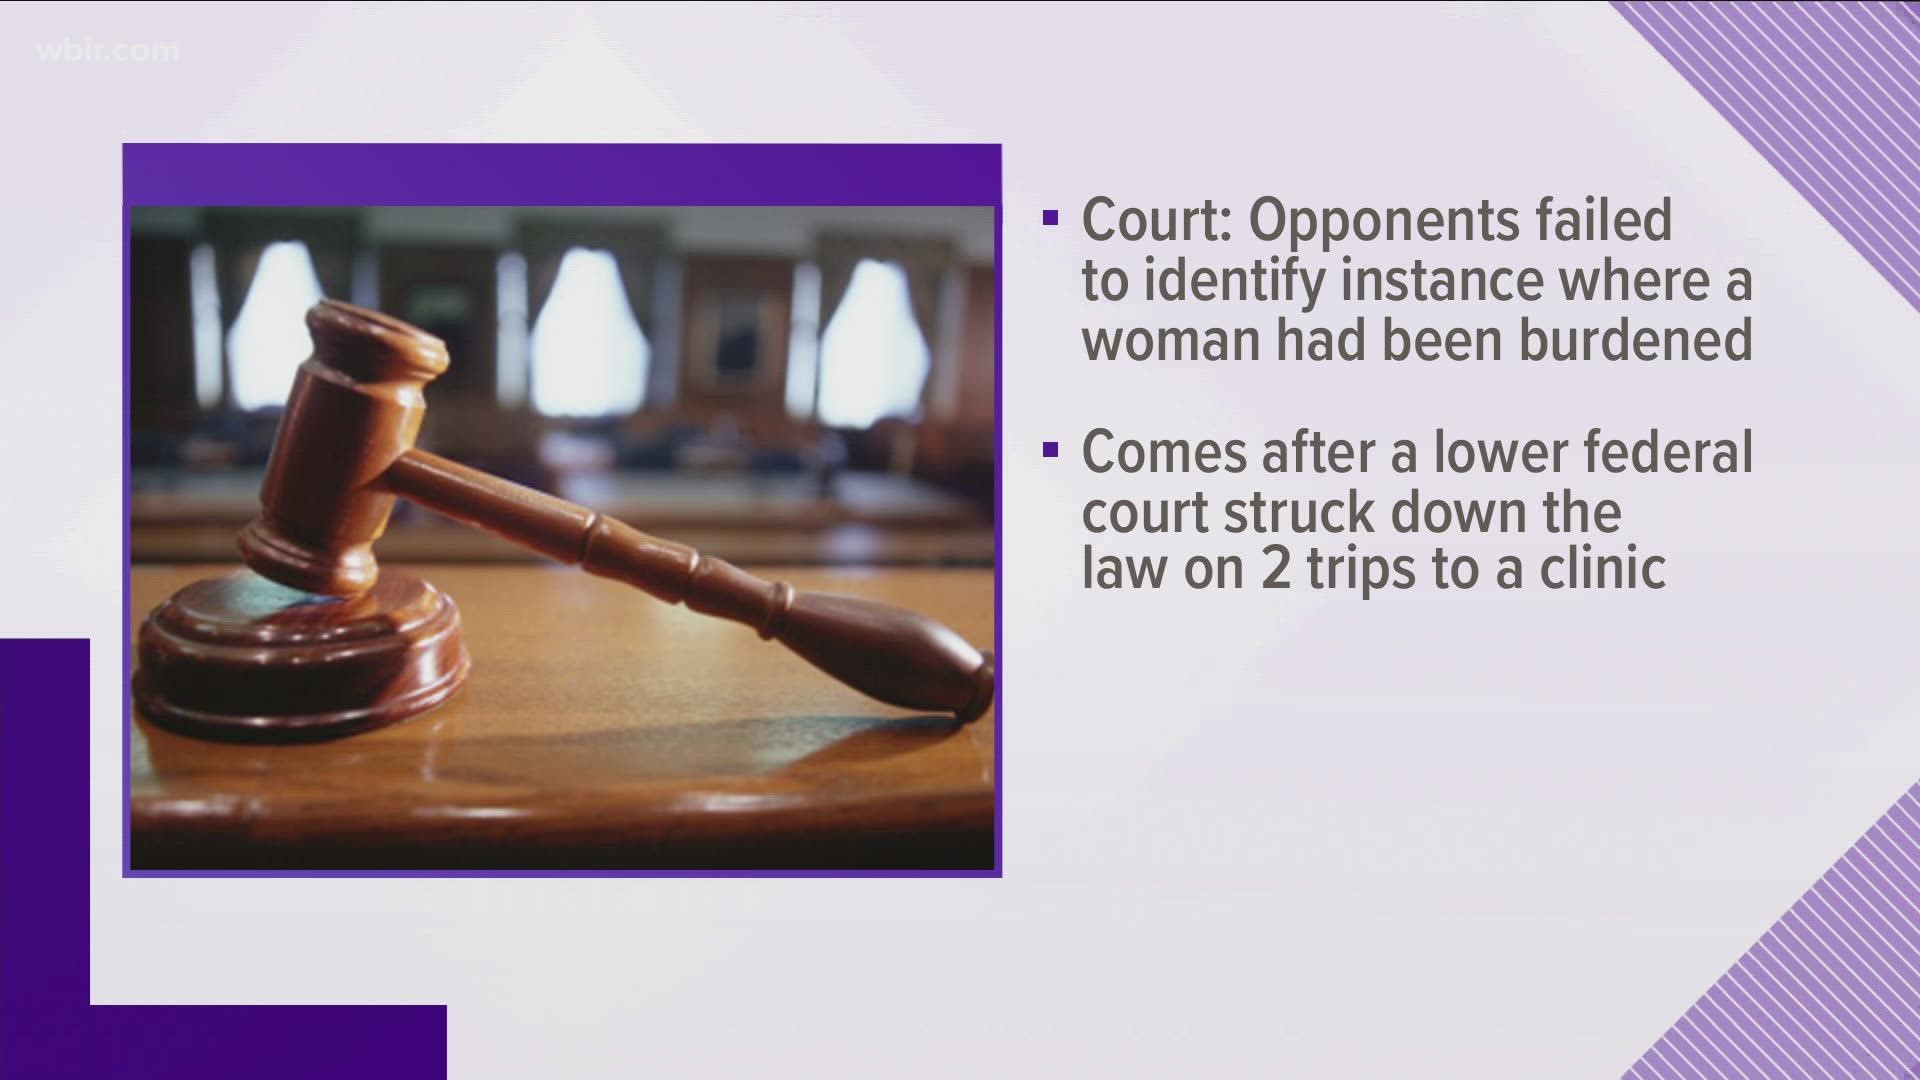 The court argues that opponents had failed to identify instances where a woman had been significantly burdened by the requirement.